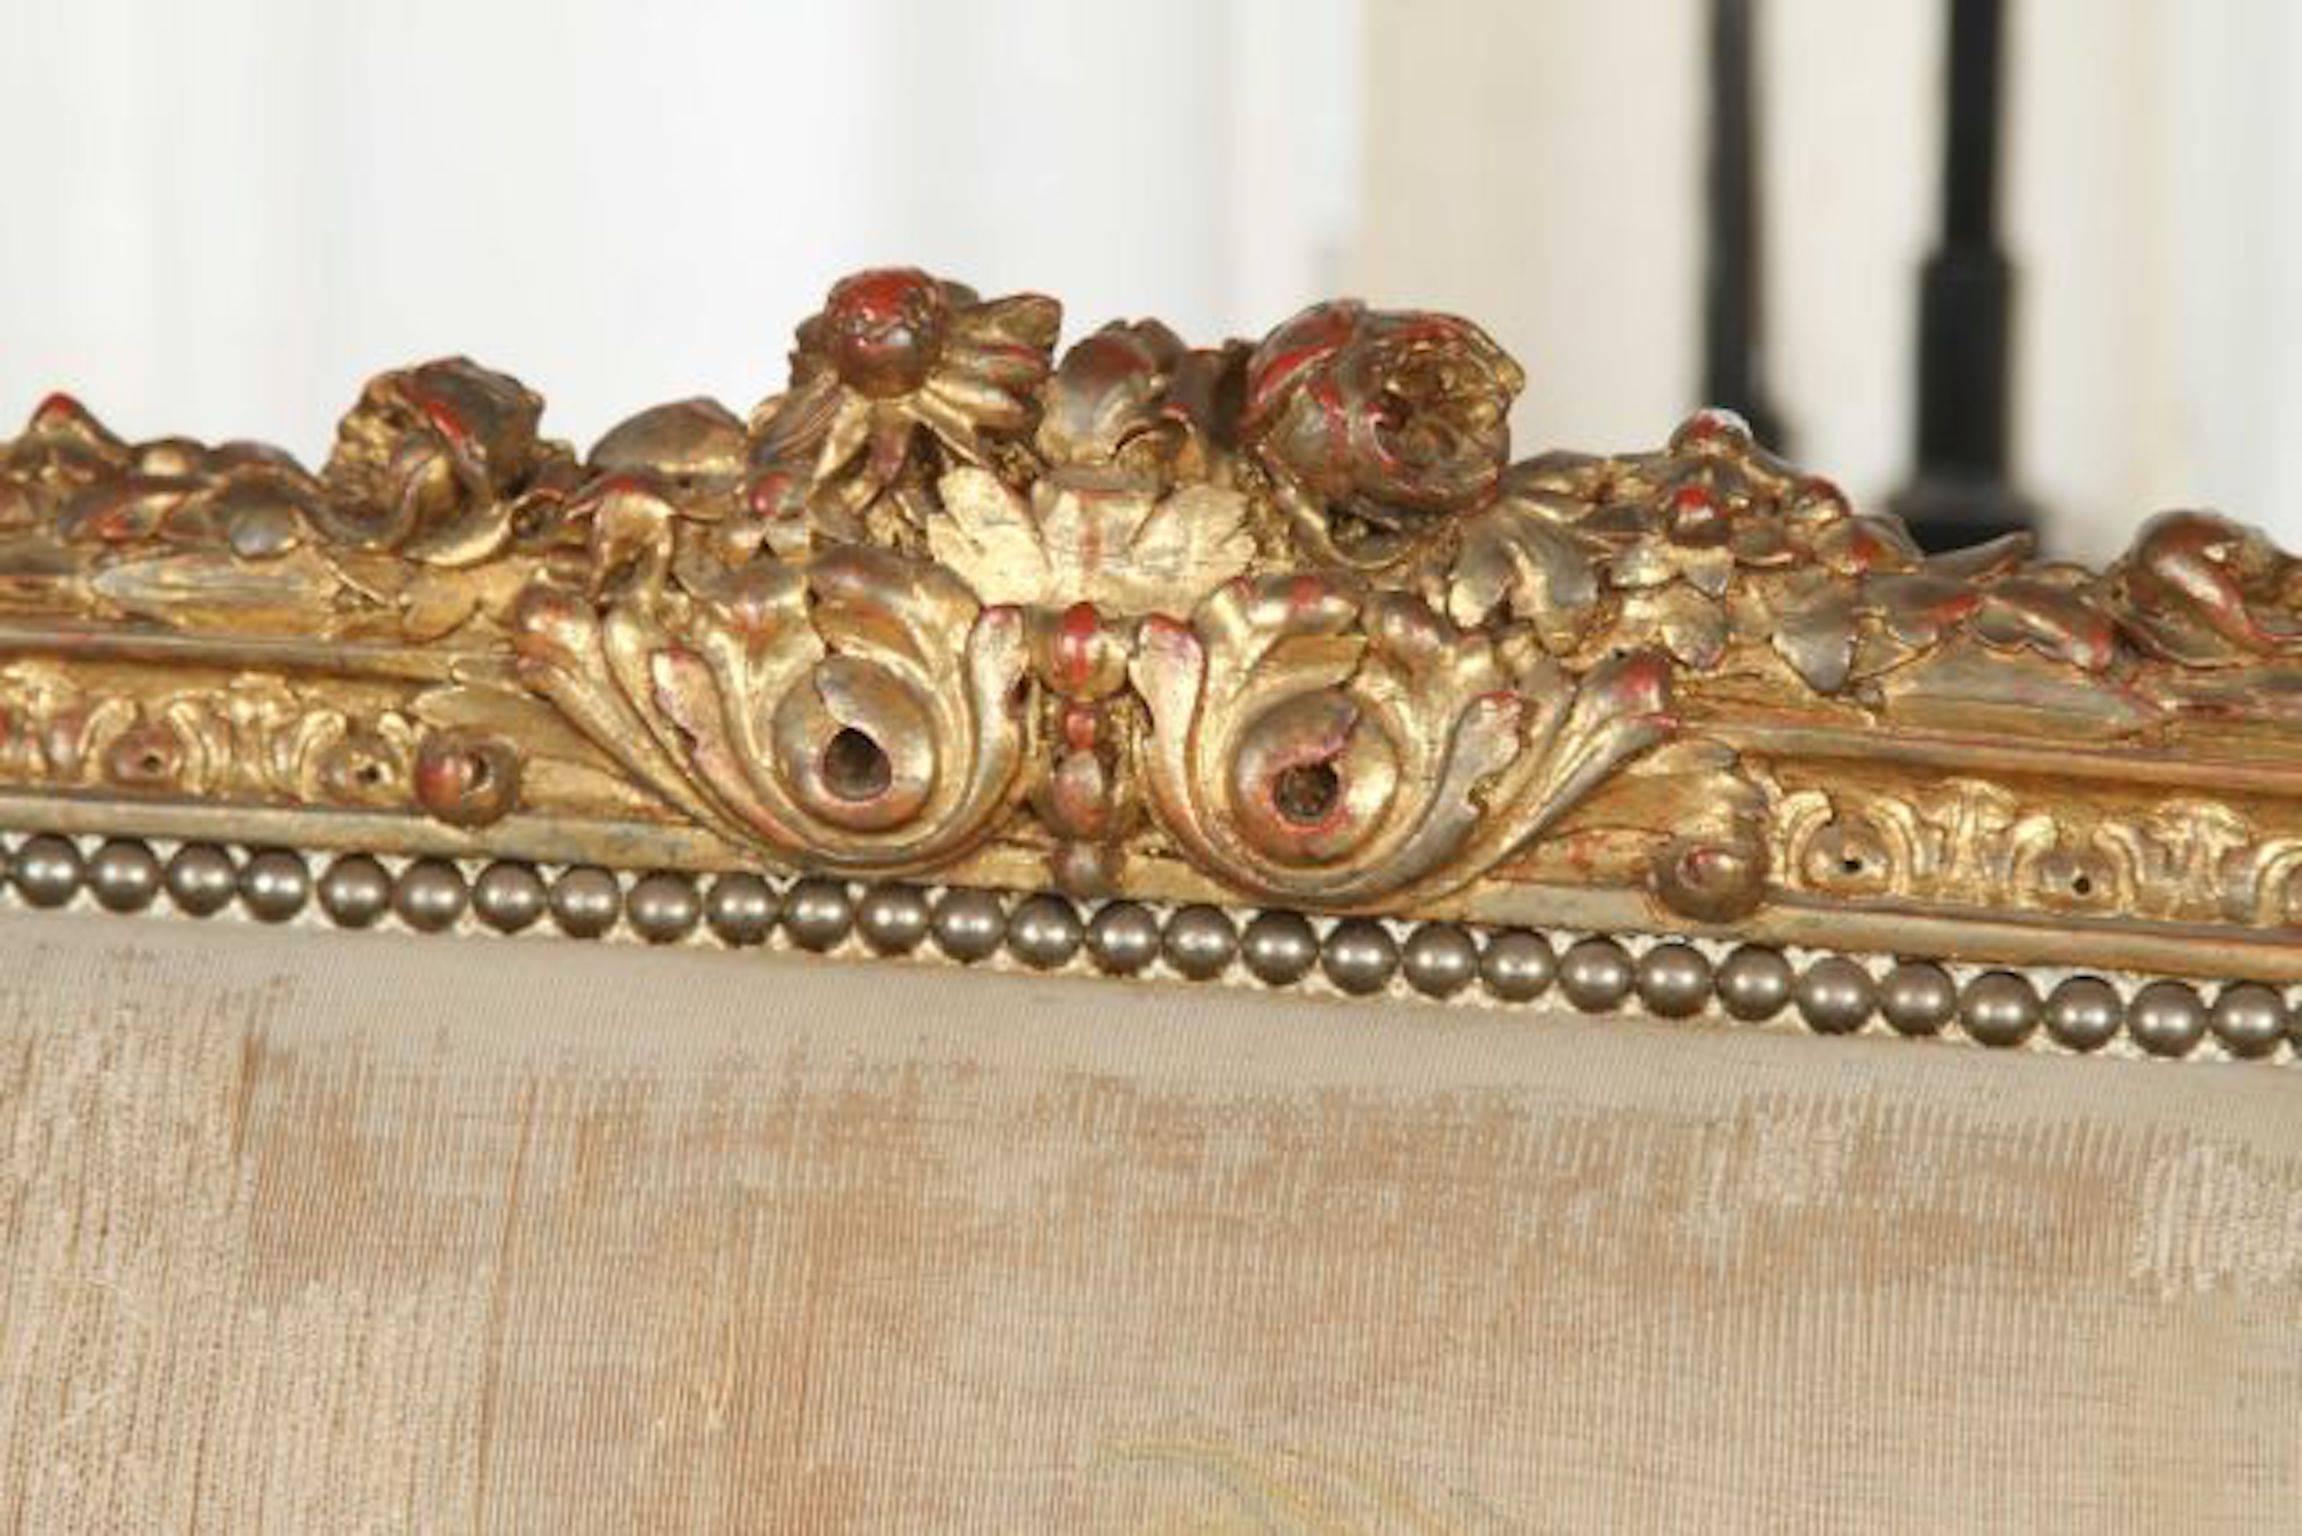 19th century Louis XVI style giltwood canapé settee with Aubusson tapestry upholstery. Measures: 44